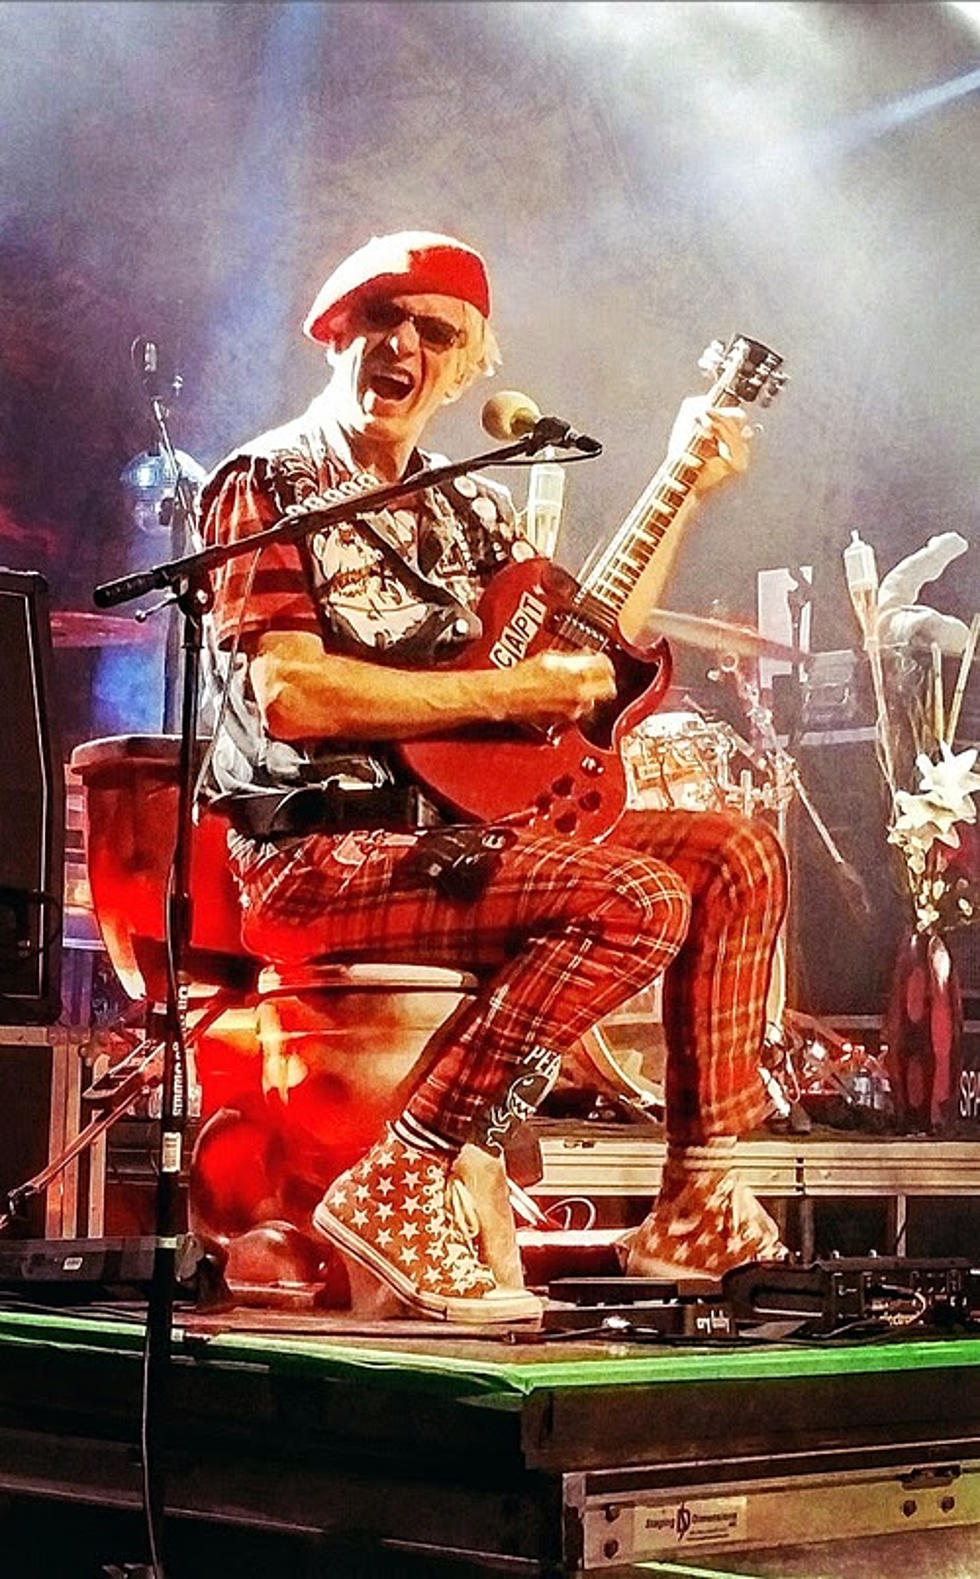 The Damned are back on tour with recovering Captain Sensible on a throne (video/setlist from Asbury Park)